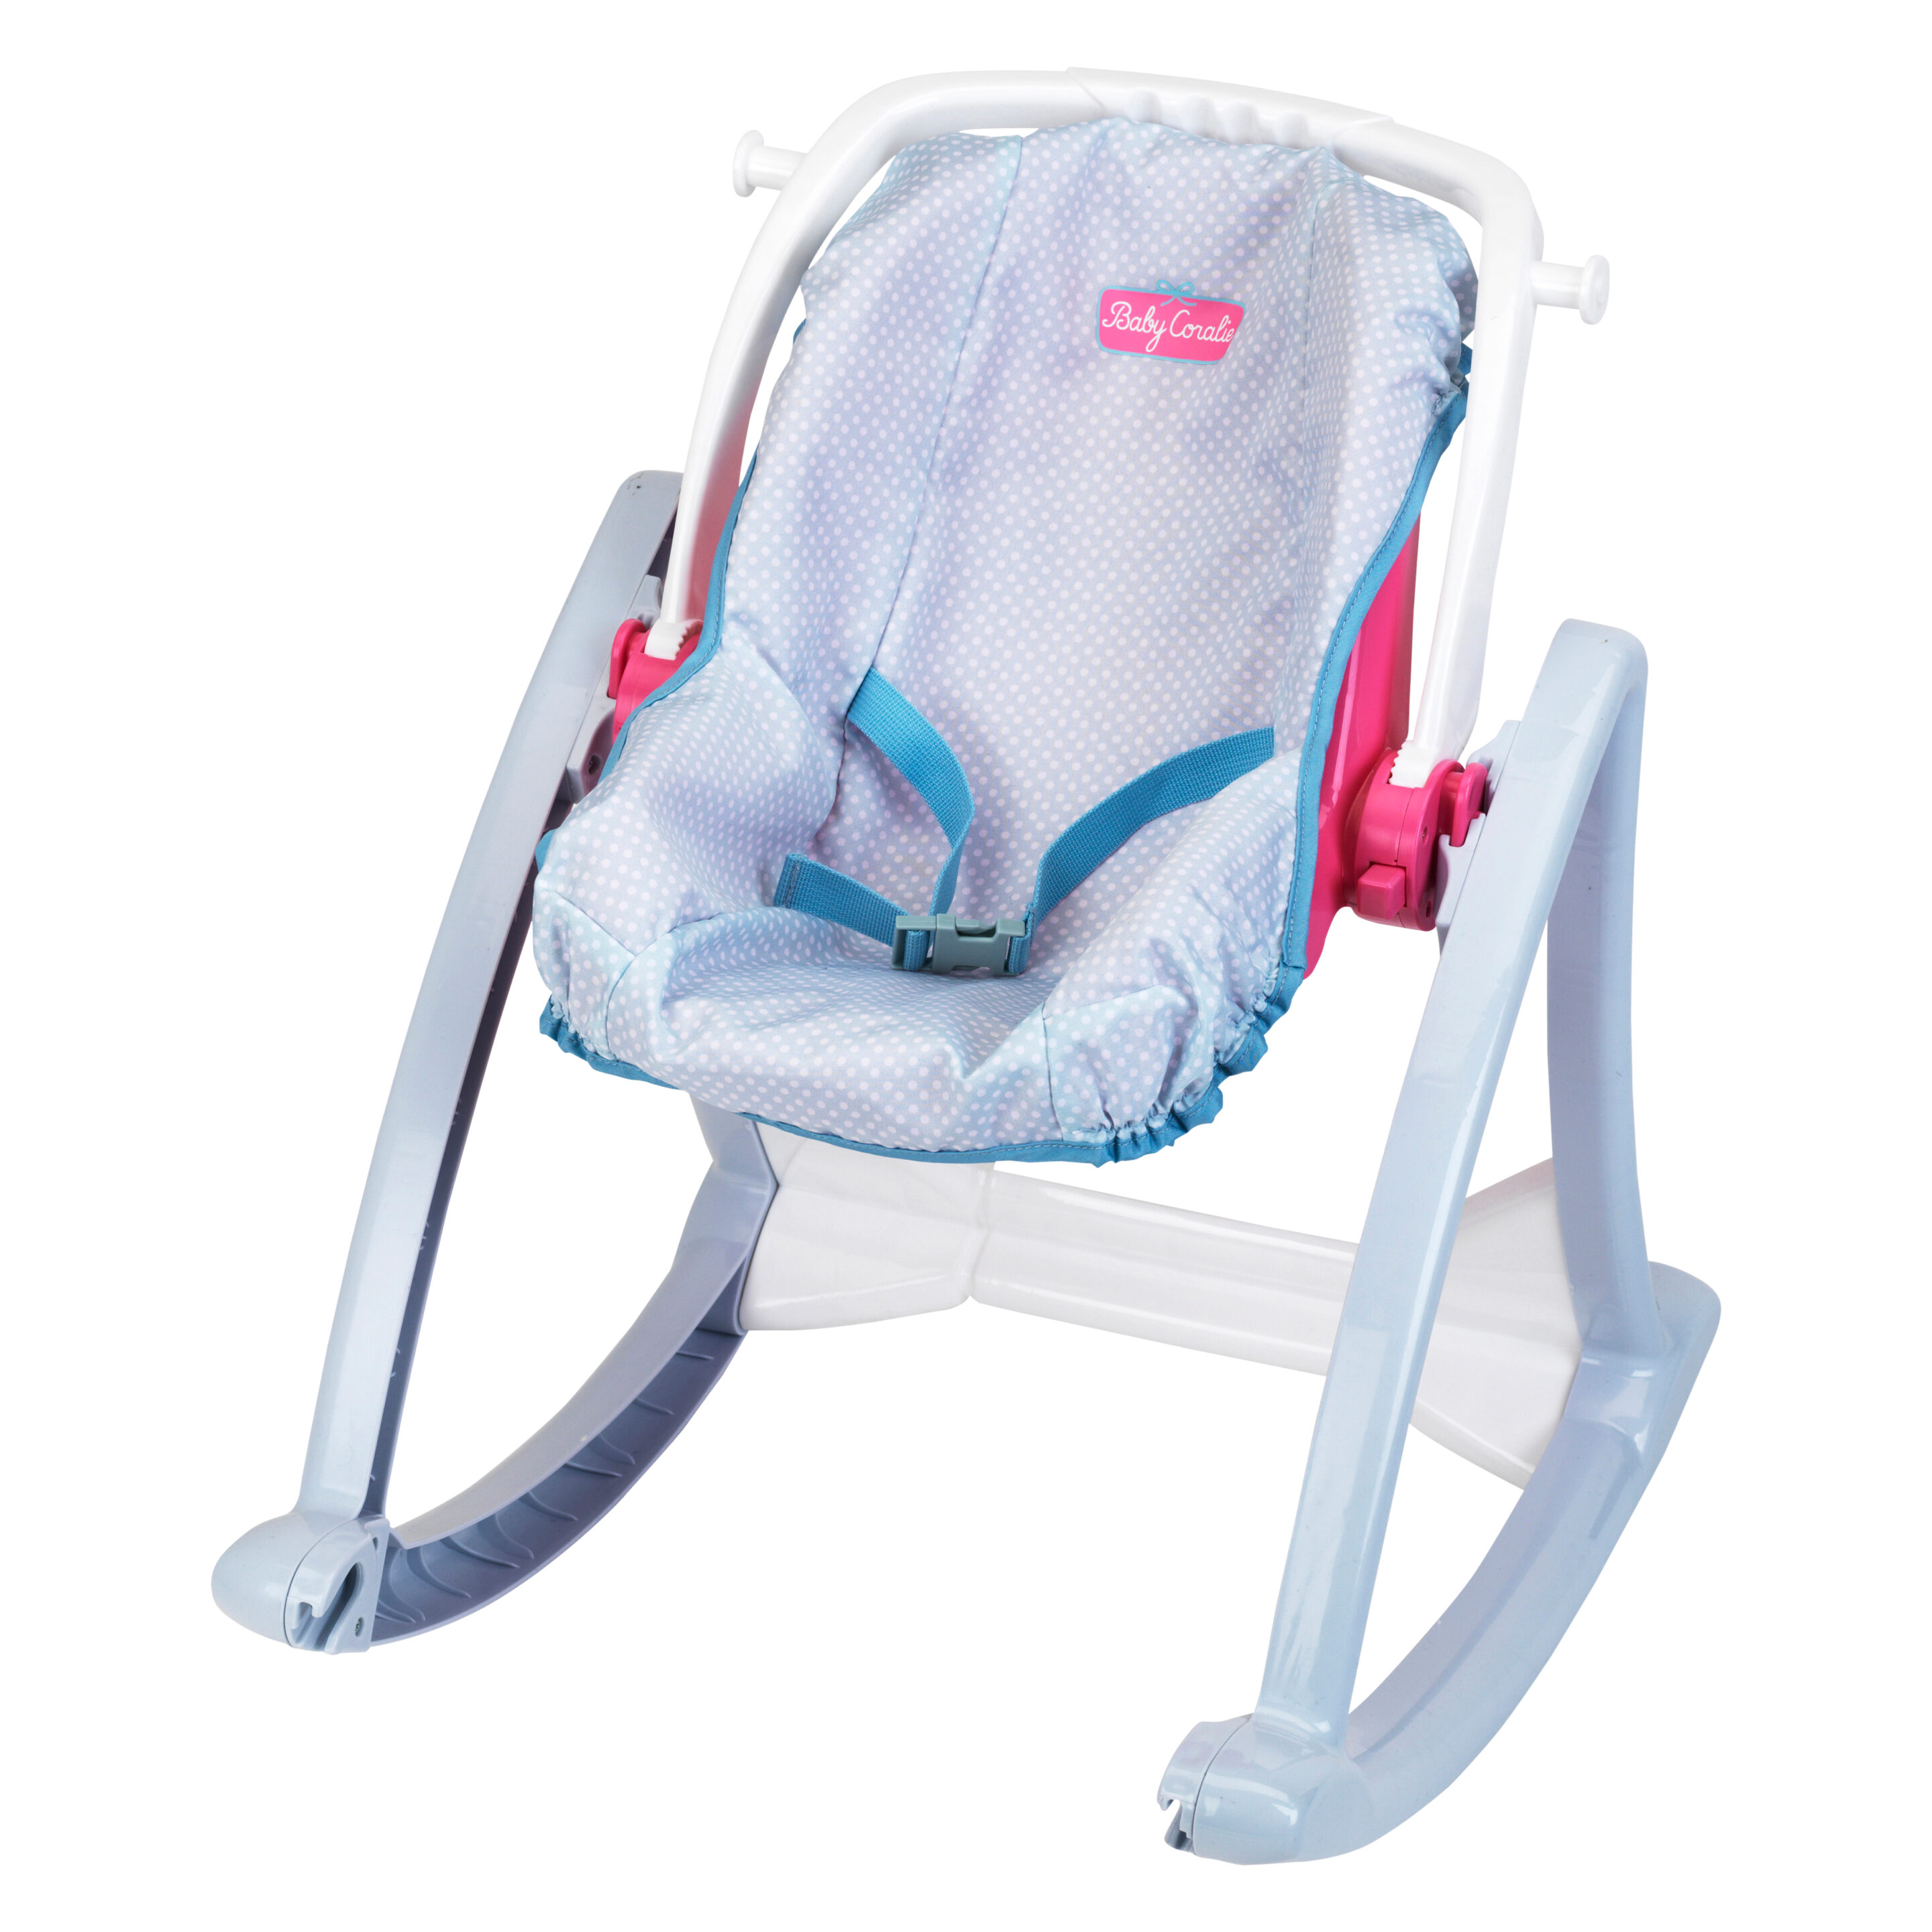 Baby Coralie - High chair, 4 in 1